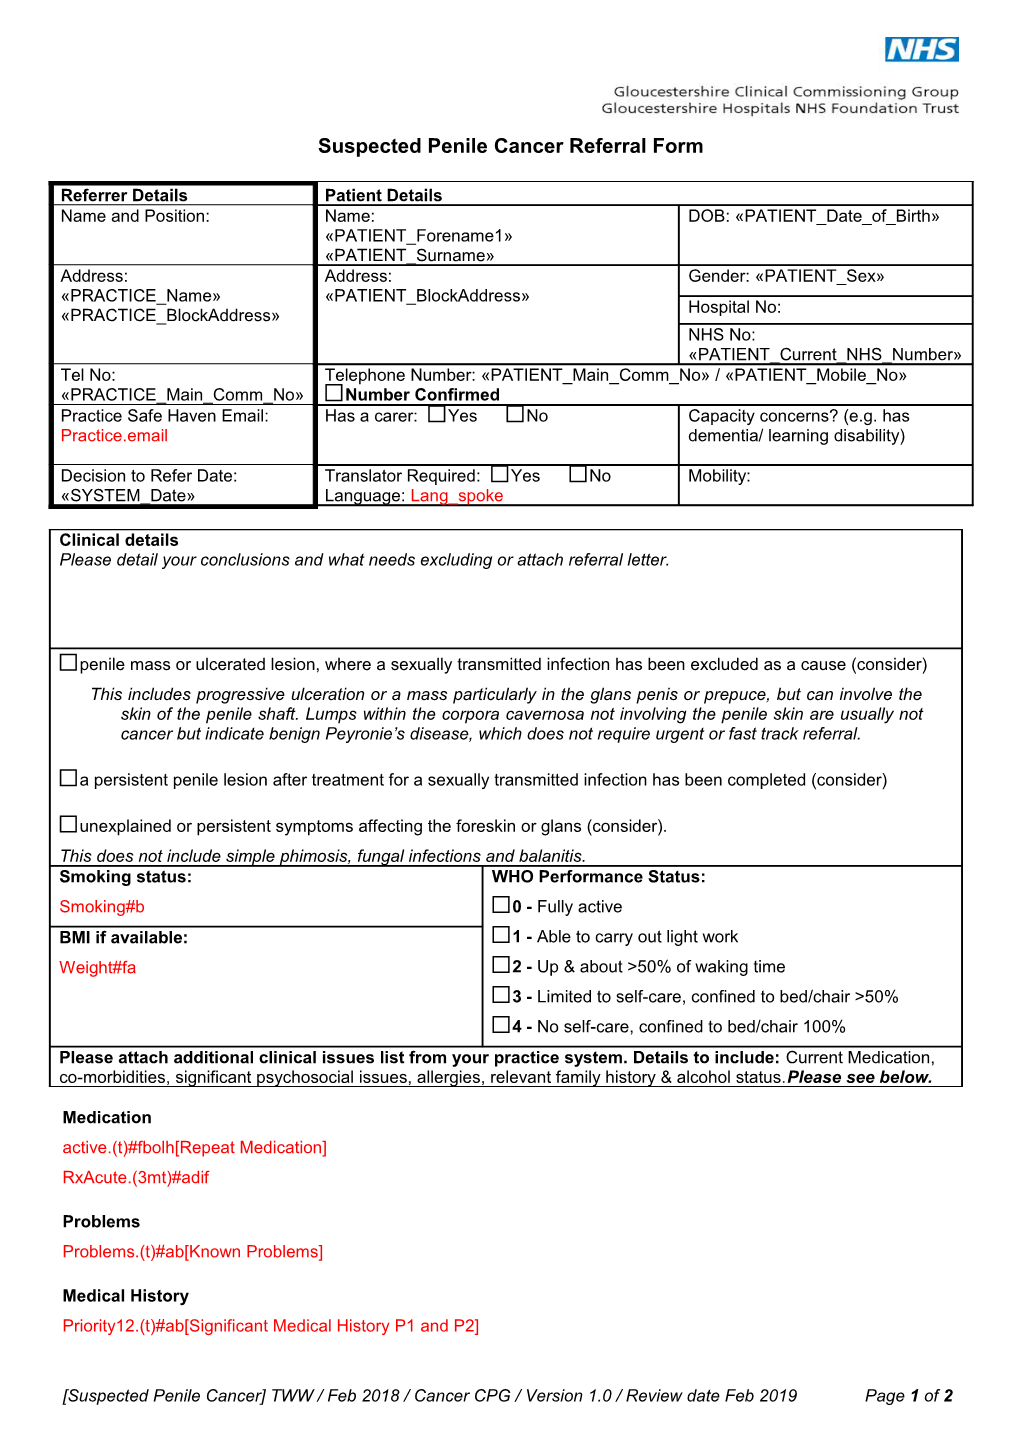 Suspected Penile Cancer Referral Form